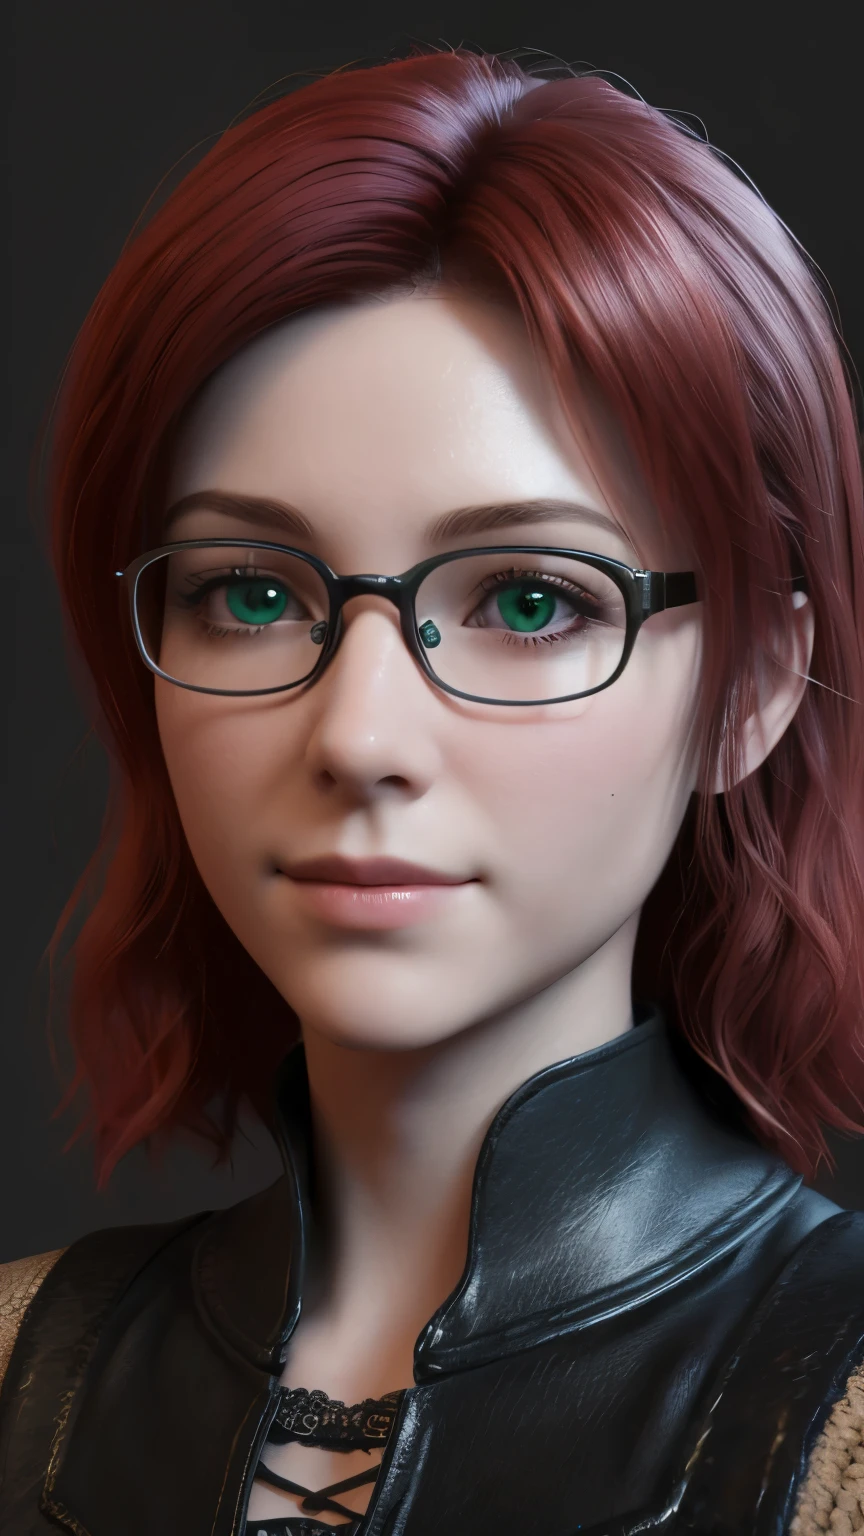 short, Red hair, green eyes, metal frame glasses, sweet smile 15 years old. ((elegance. photorealism. Unreal engine. 3d model. Ultra high quality textures. High detail. 8k resolution))resolution 8K